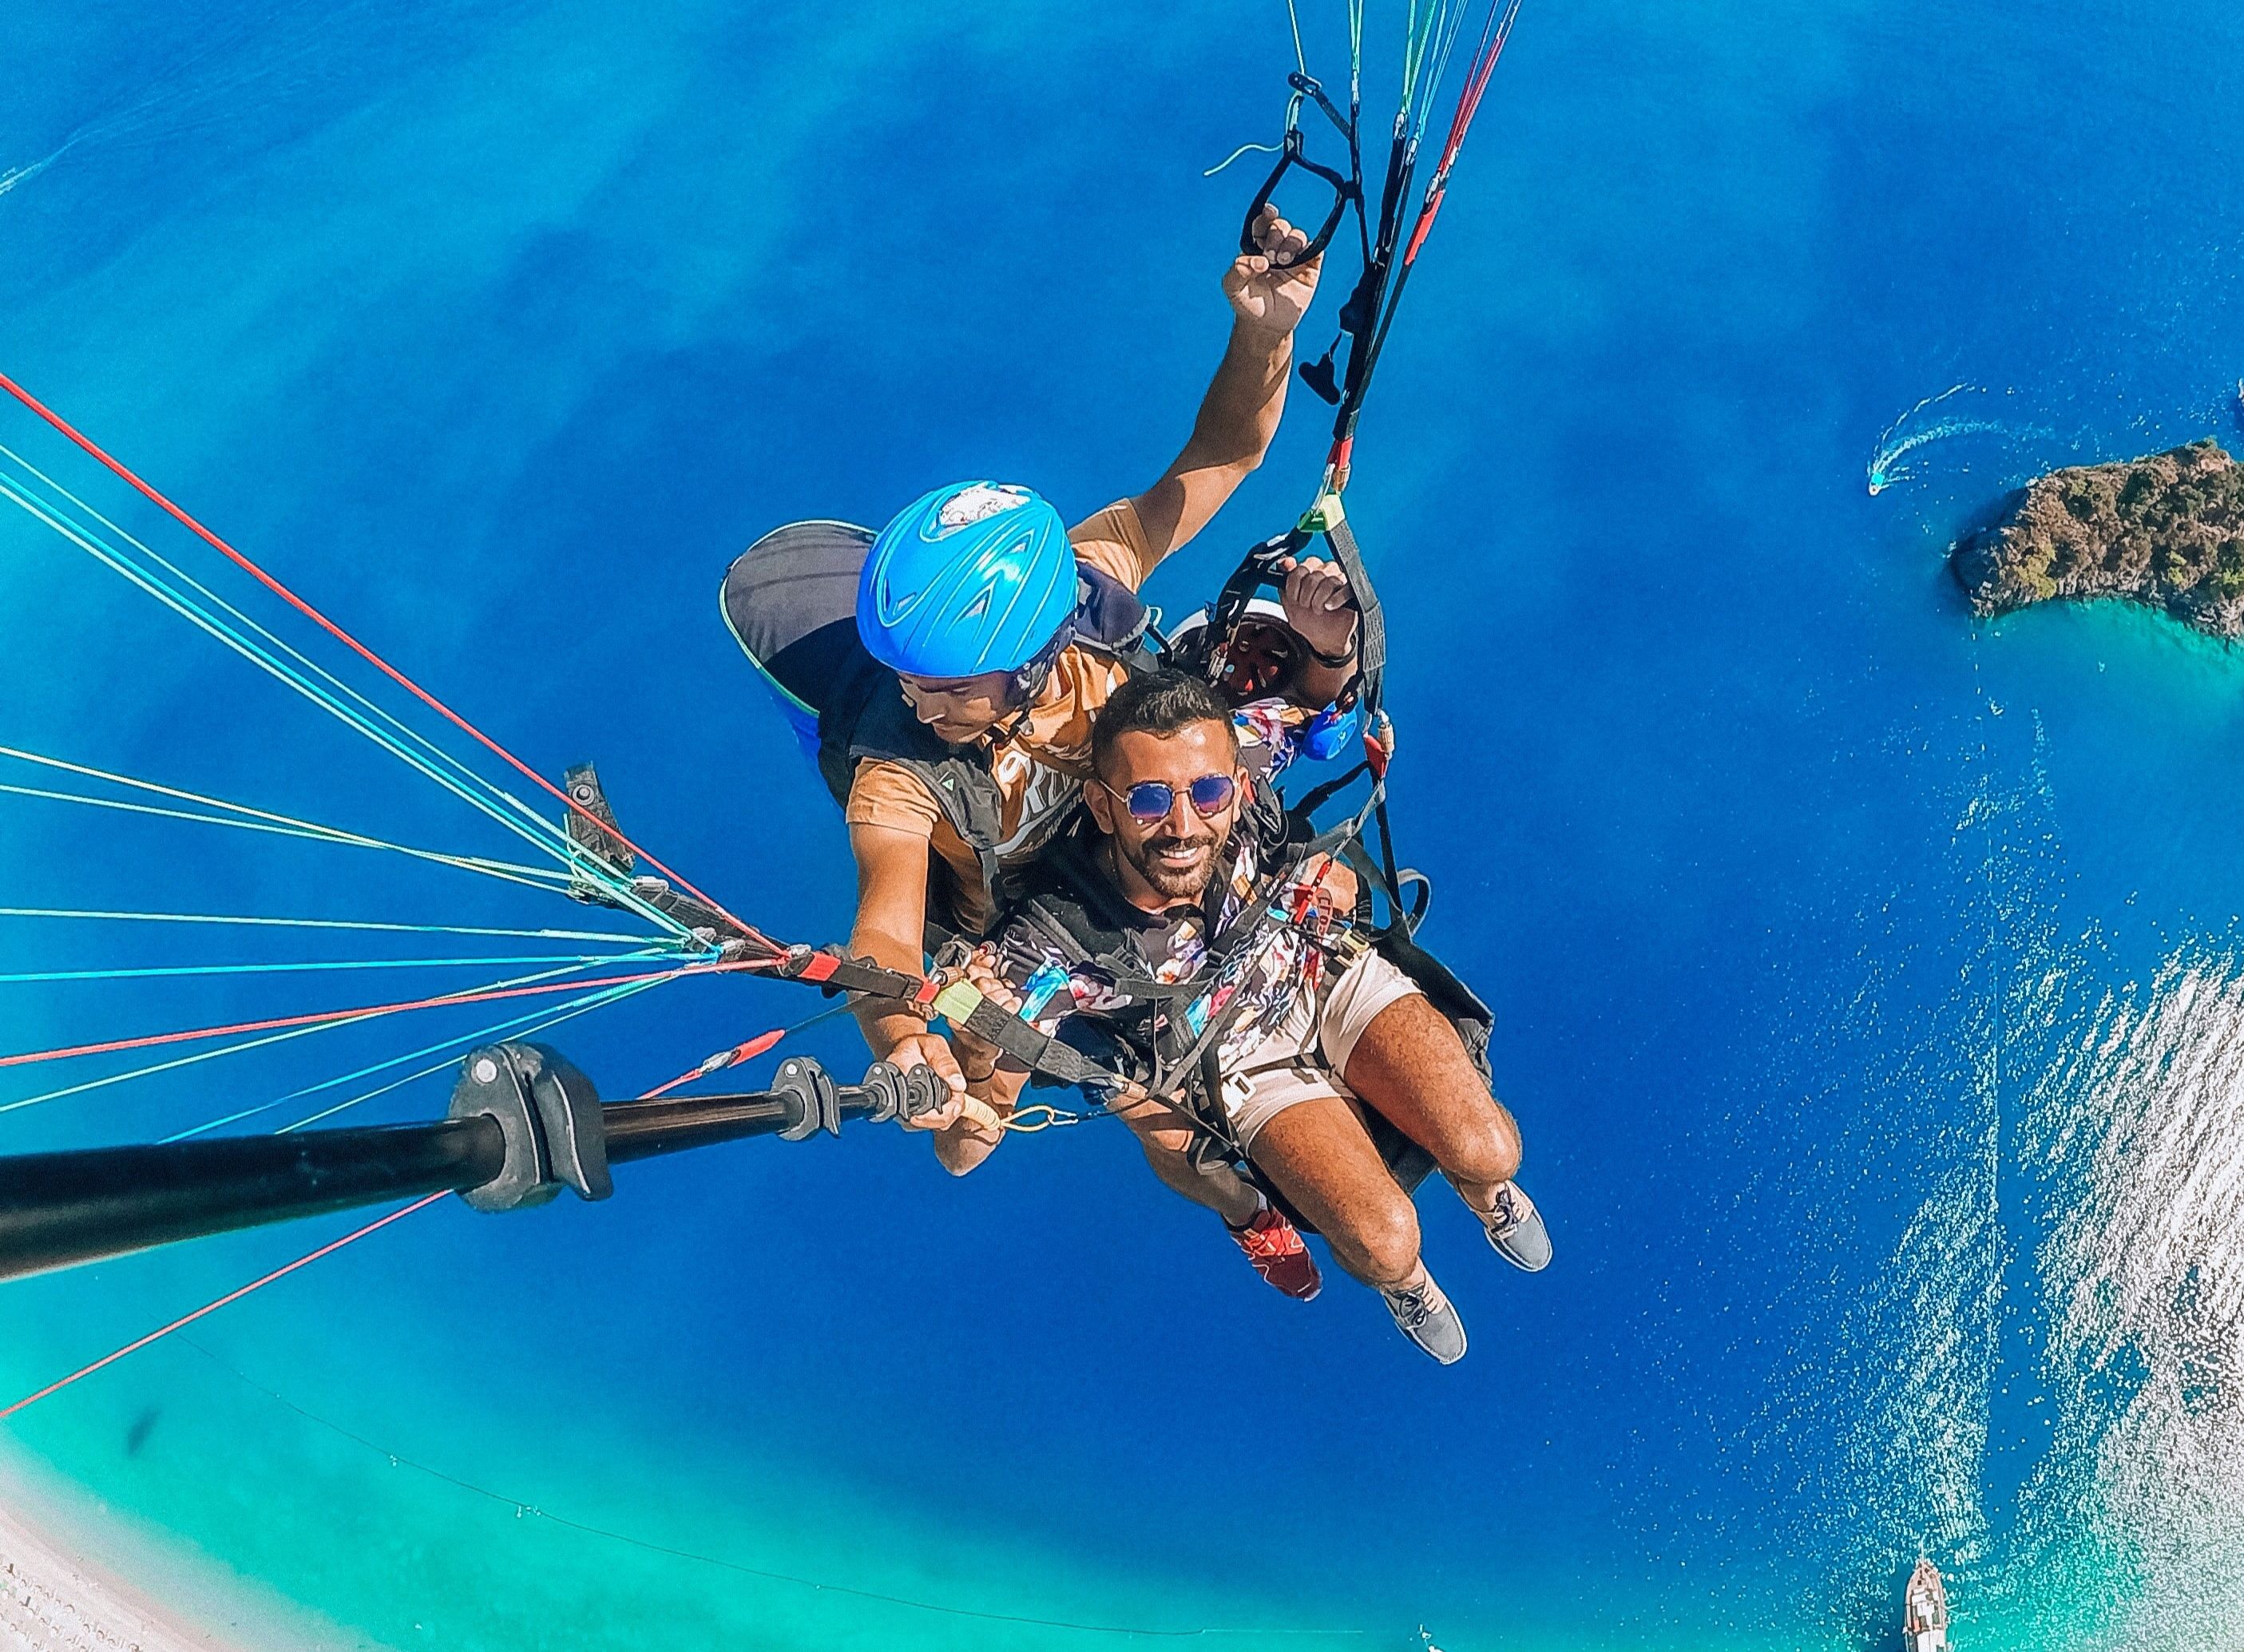 A couple taking a selfie while skydiving.